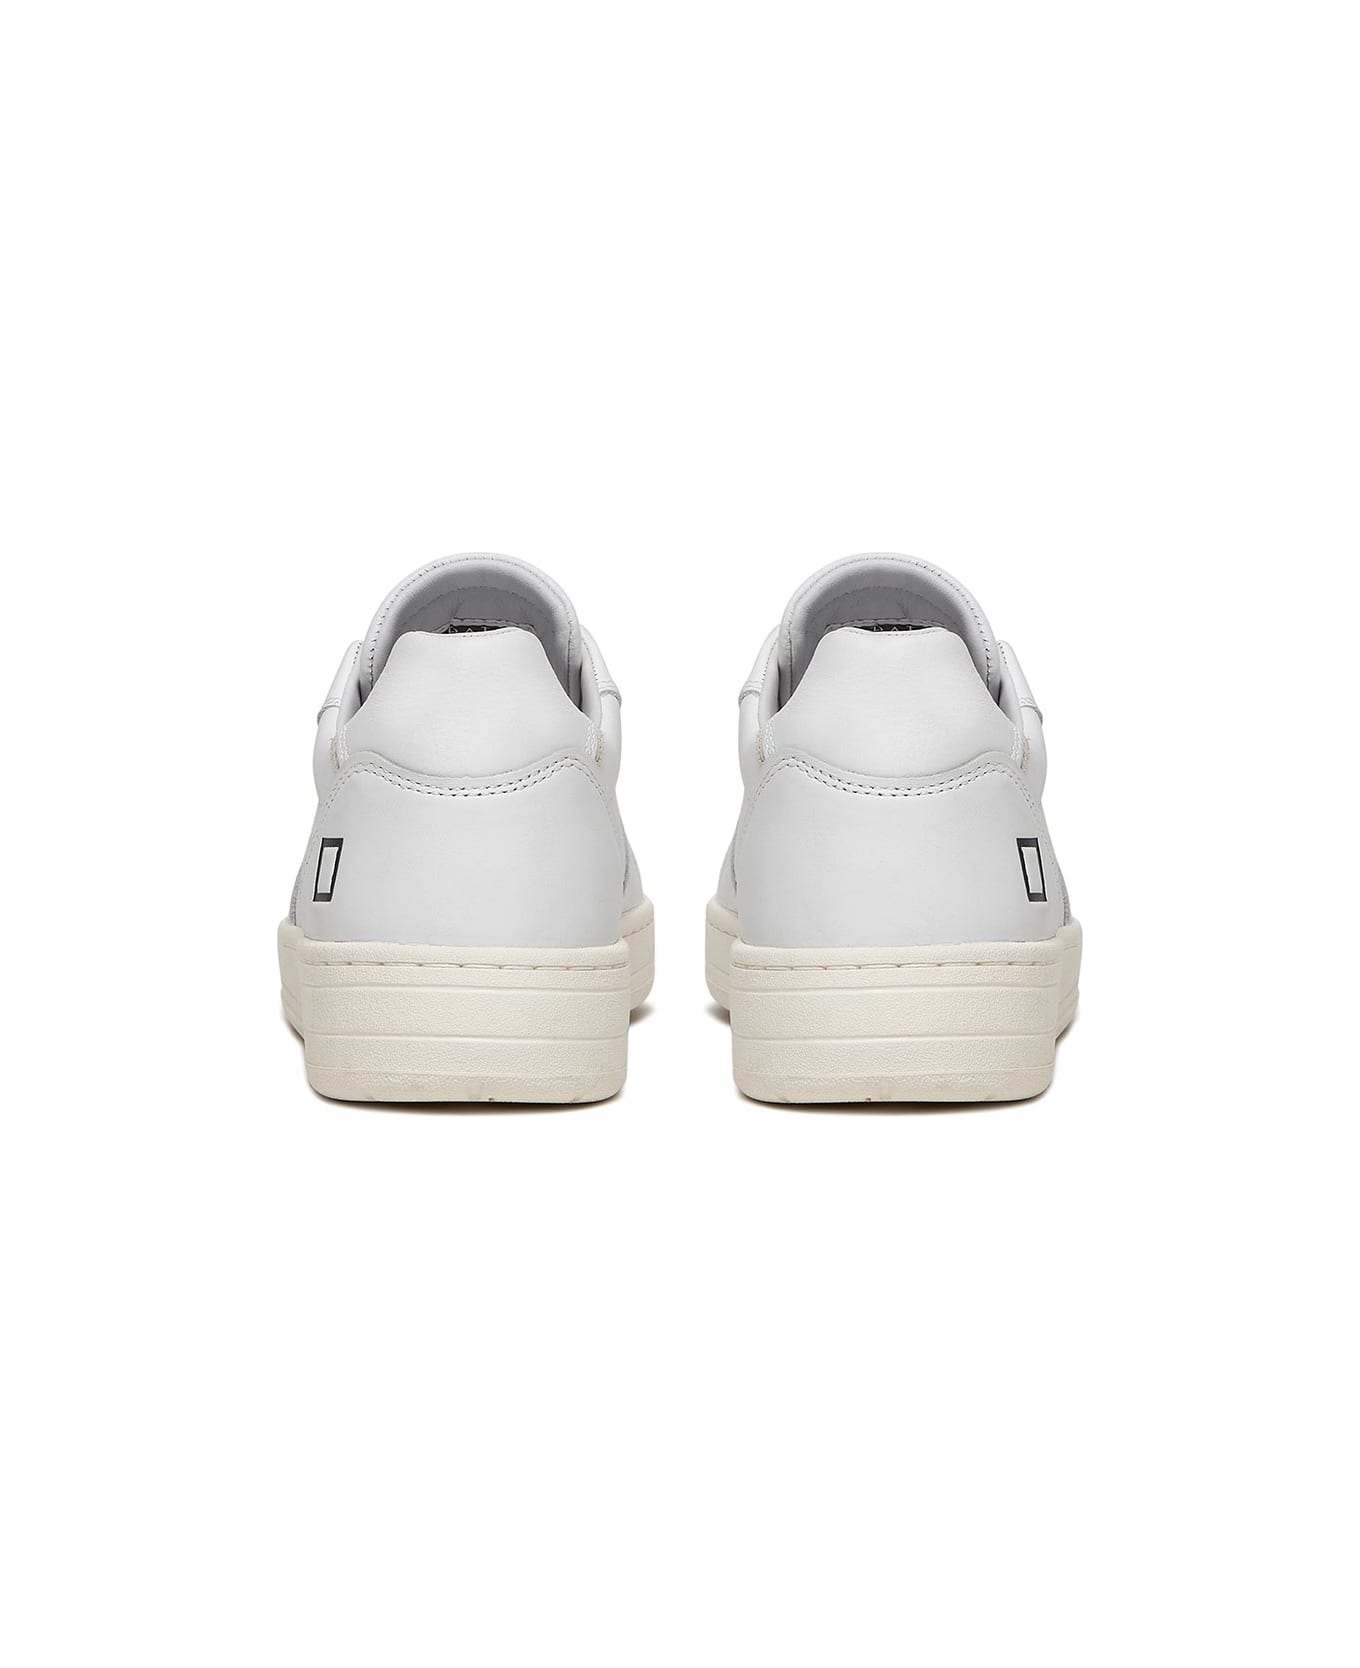 D.A.T.E. Court Sneakers In Leather - WHITE